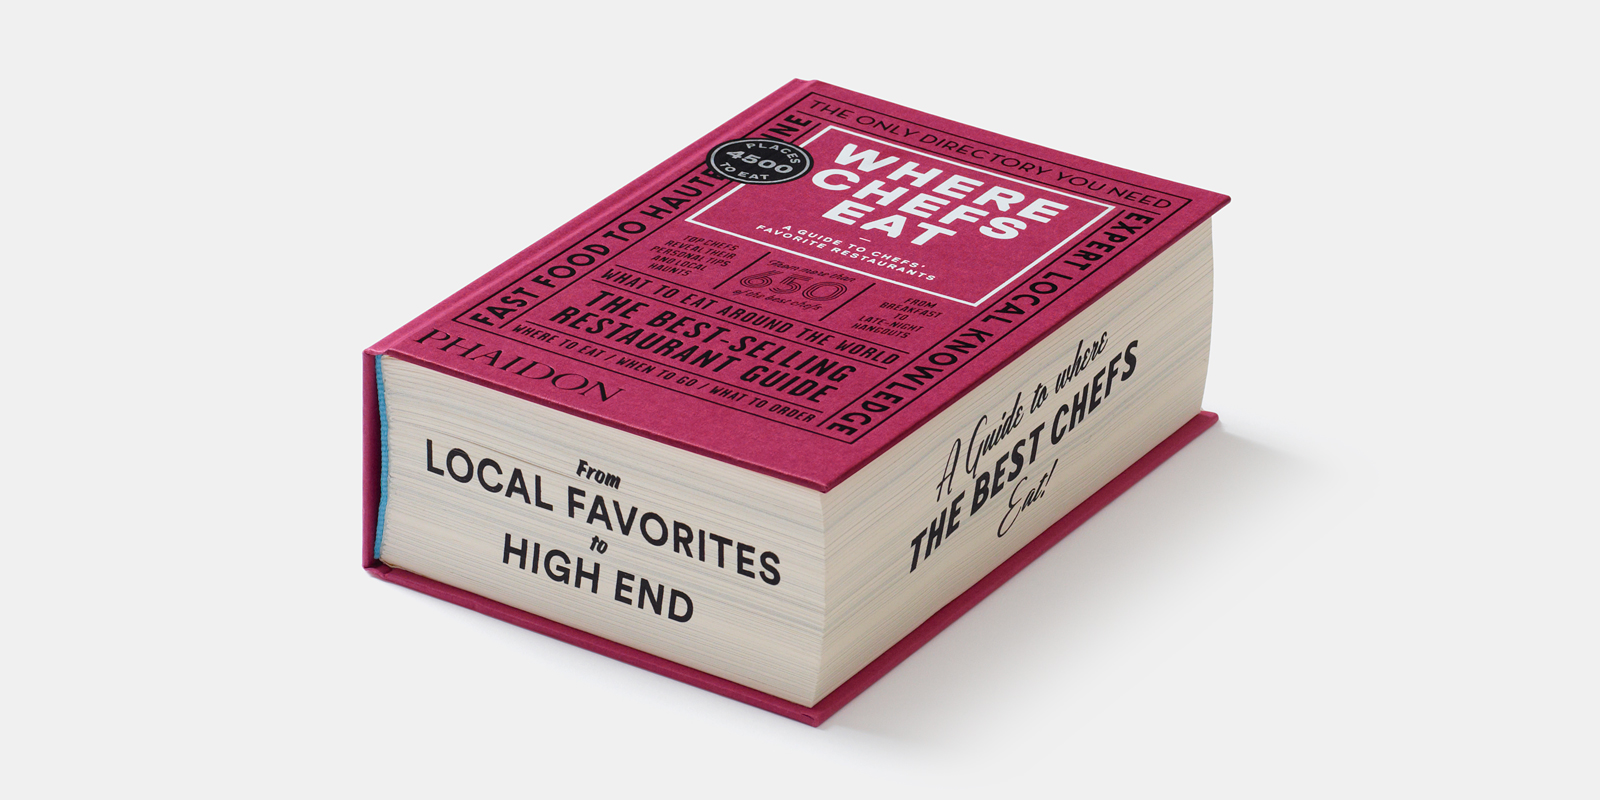 Where Chefs Eat: A Guide to Chefs' Favorite Restaurants